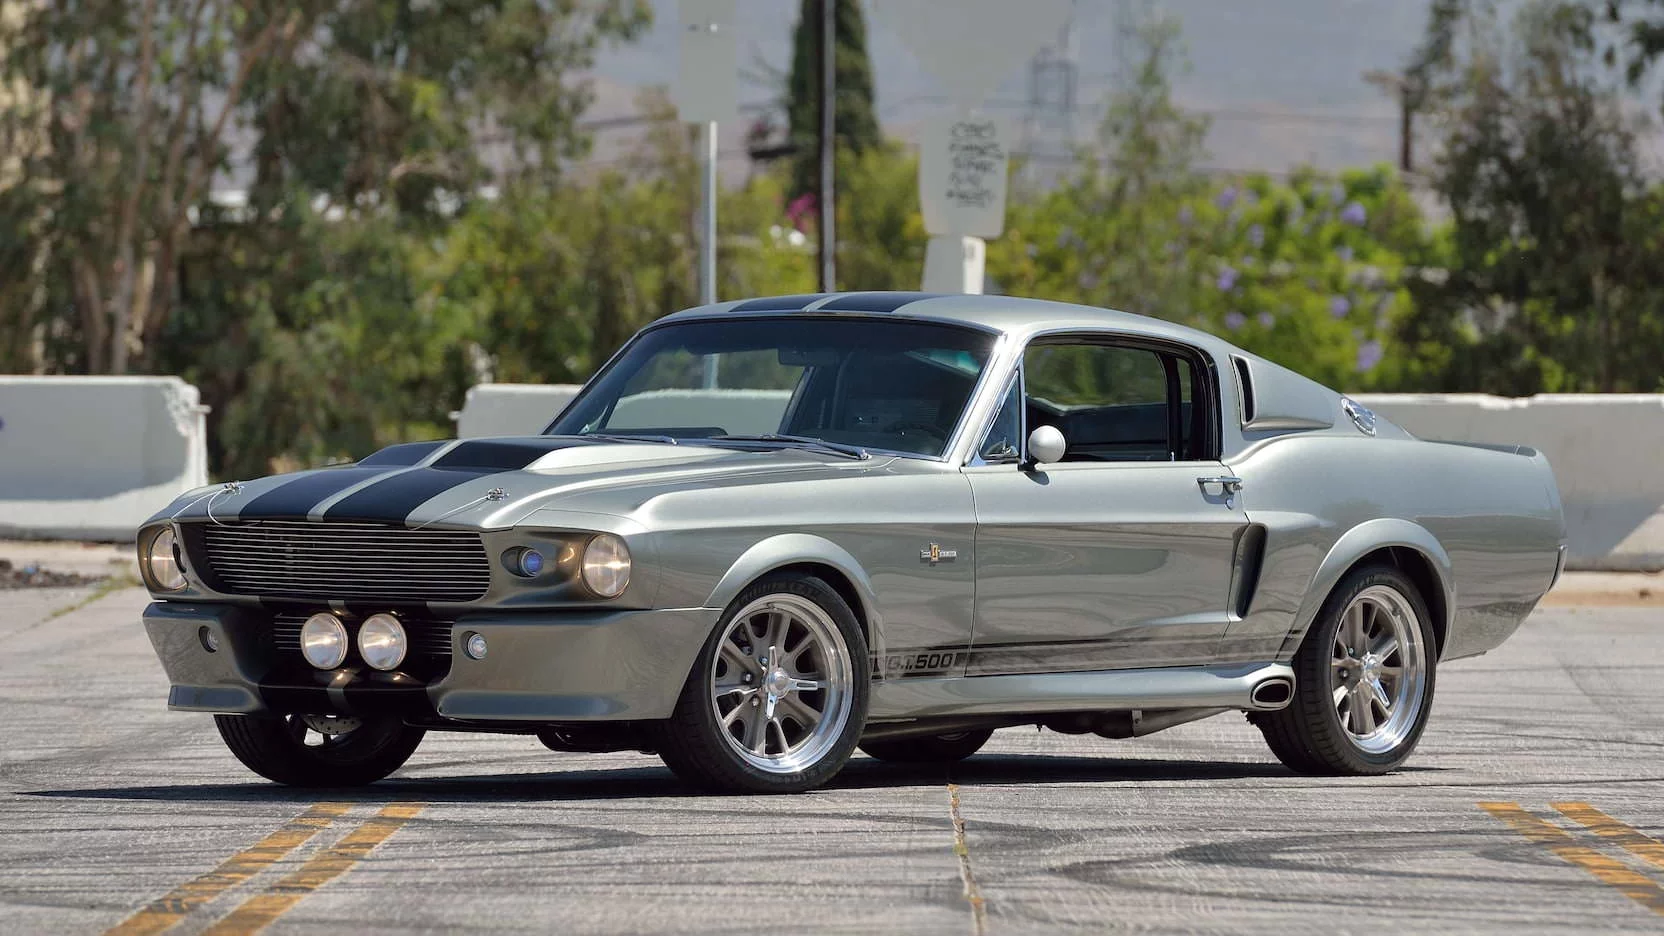 1967 Ford Mustang Shelby Gt500 Eleanor From Gone In 60 Seconds Heads To